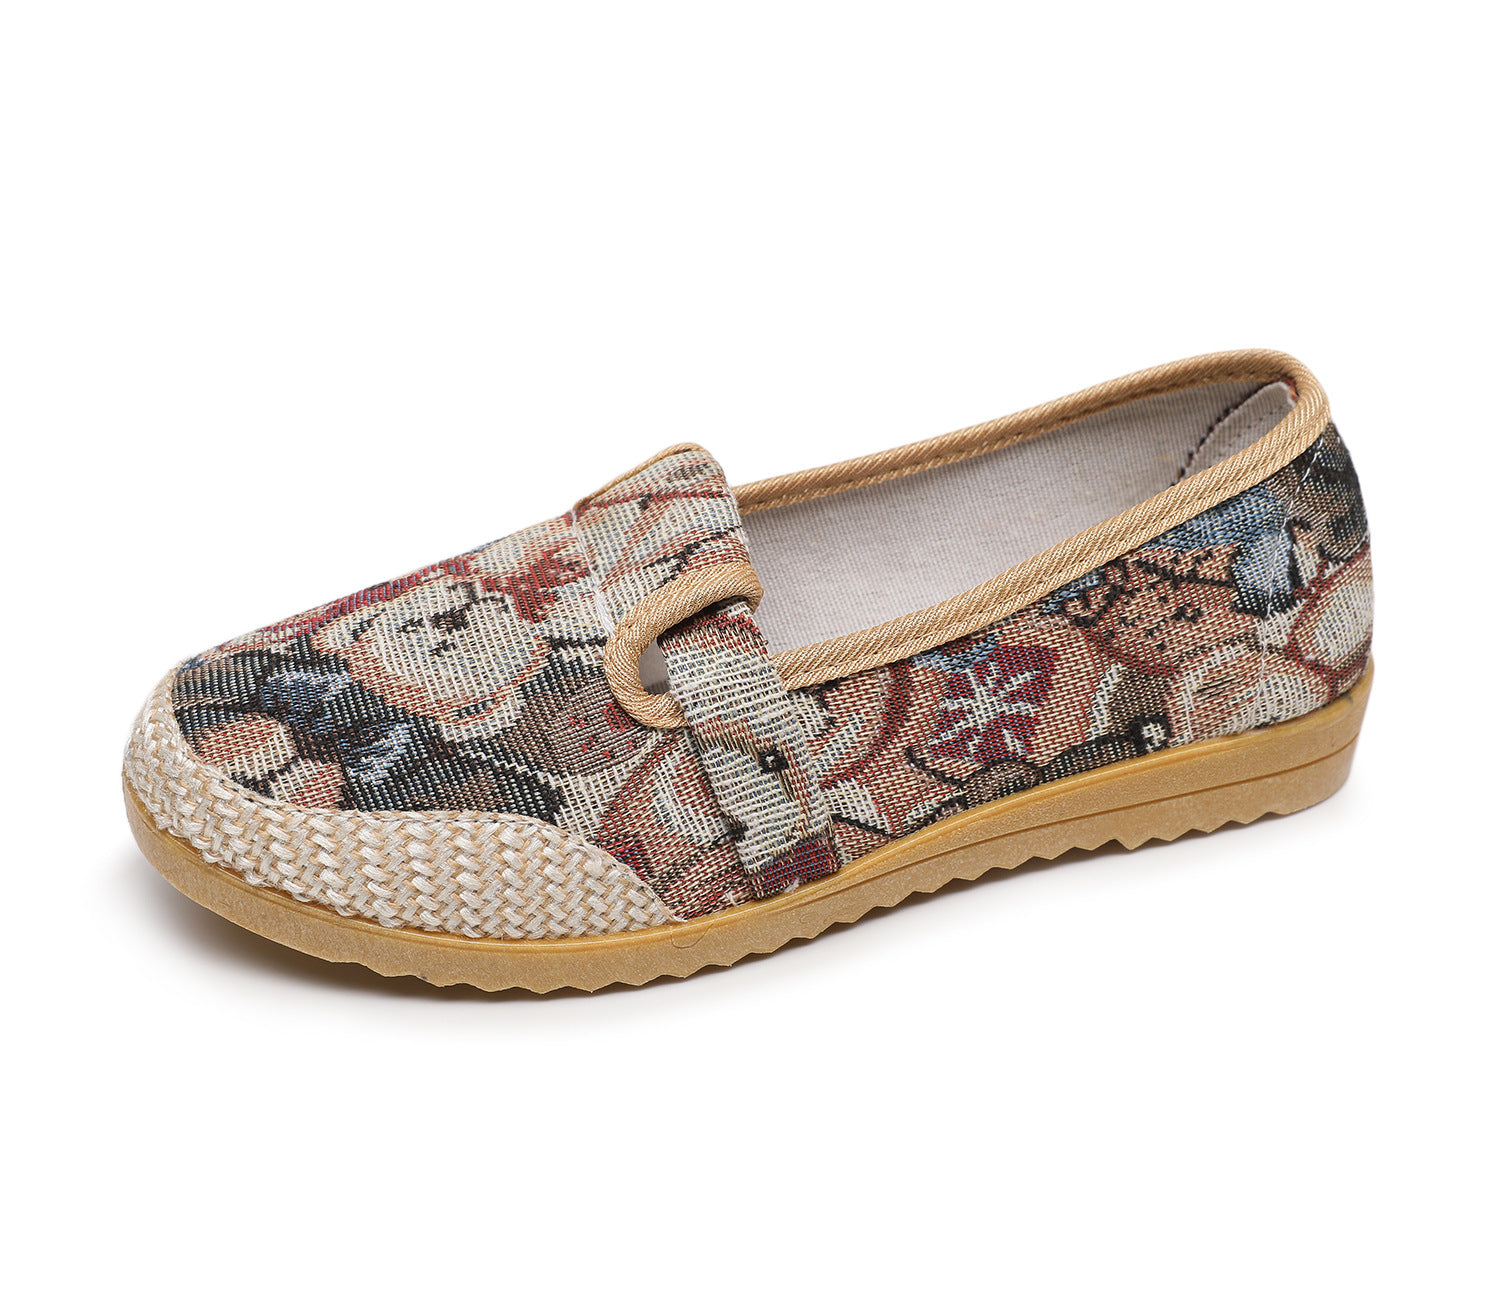 Non-slip Soft Sole Slip-on Casual Comfortable Shoes